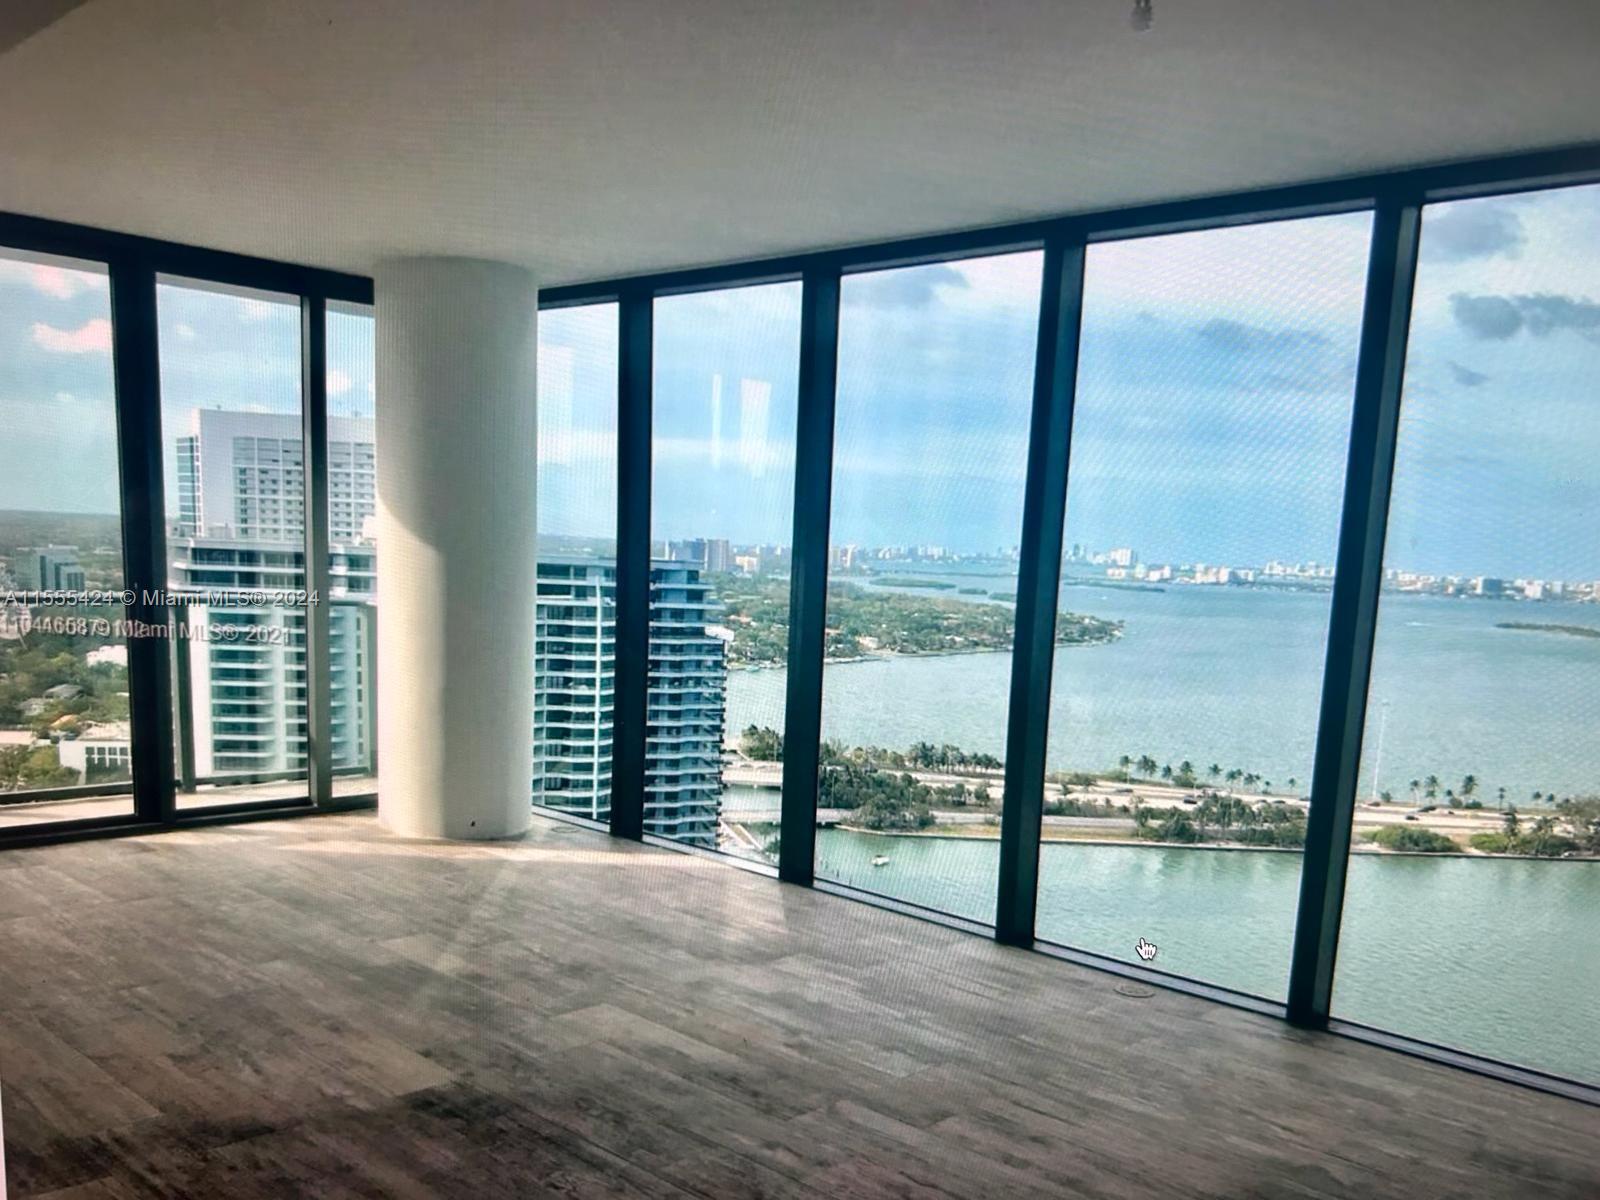 1 Bed + 1.5 . Amazing views bay view on Biscayne Bay and the City. Rental include water, basic cable and internet.European kitchen, subzero & Bosh appliances. Heated swimming pool, gym, spa, garden and beautifully landscaped sun terrace. Washer & dryer inside the unit. Bosch appliances, quartz countertop, shades & blackouts, and semi -private foyer.. A full-service building Paraiso Bay offers tennis courts, luxury health spa with sauna & steam room, resort-style pool, fitness center, cinema, wine cellar, party room, pedestrian-friendly street, and 24-hour security, front desk, & valet.